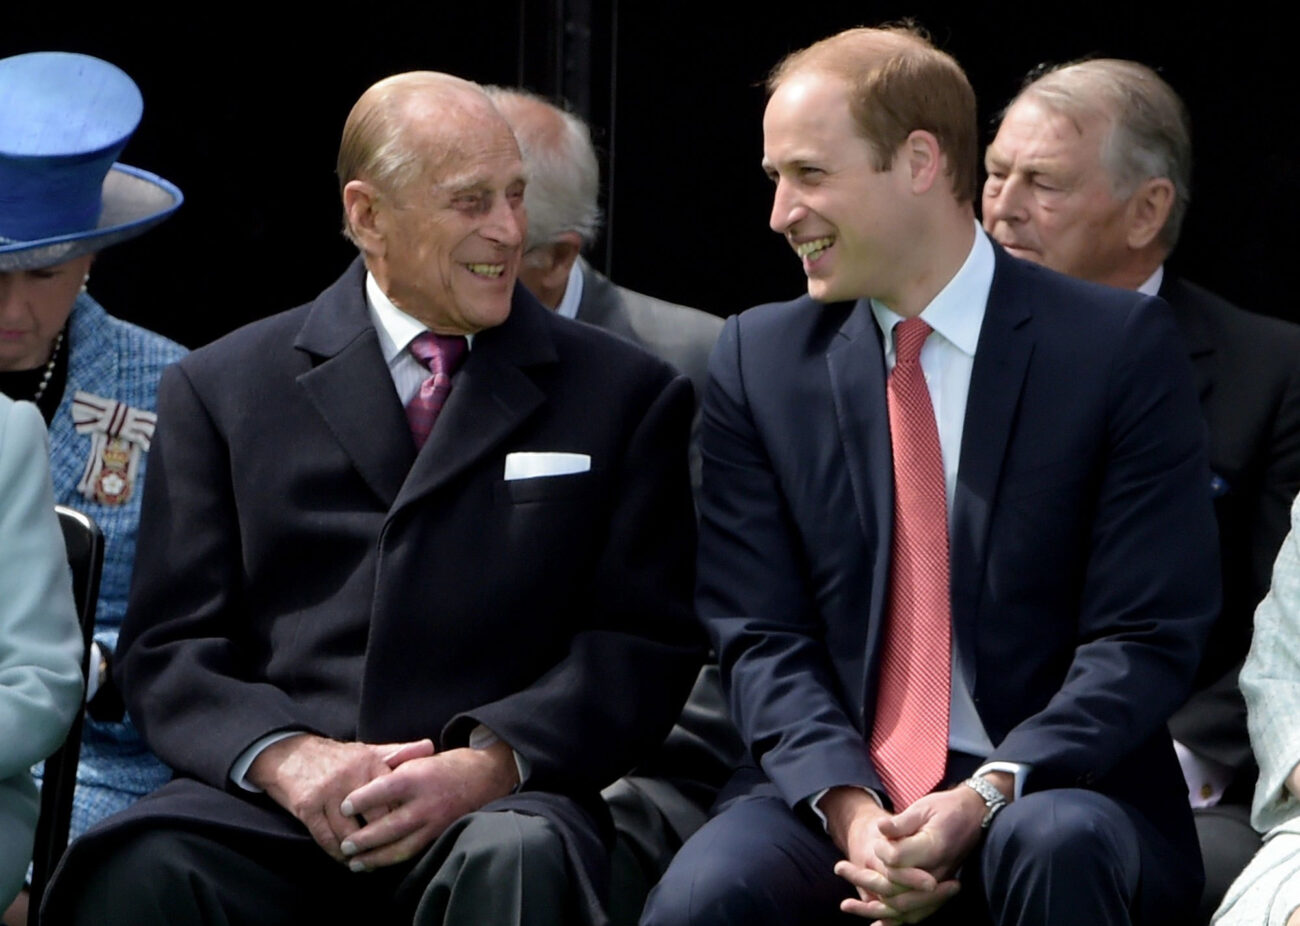 Has Prince Philip contracted COVID-19? Learn about the Duke of Edinburgh's hospital stay and how the royal family has been handling COVID-19.